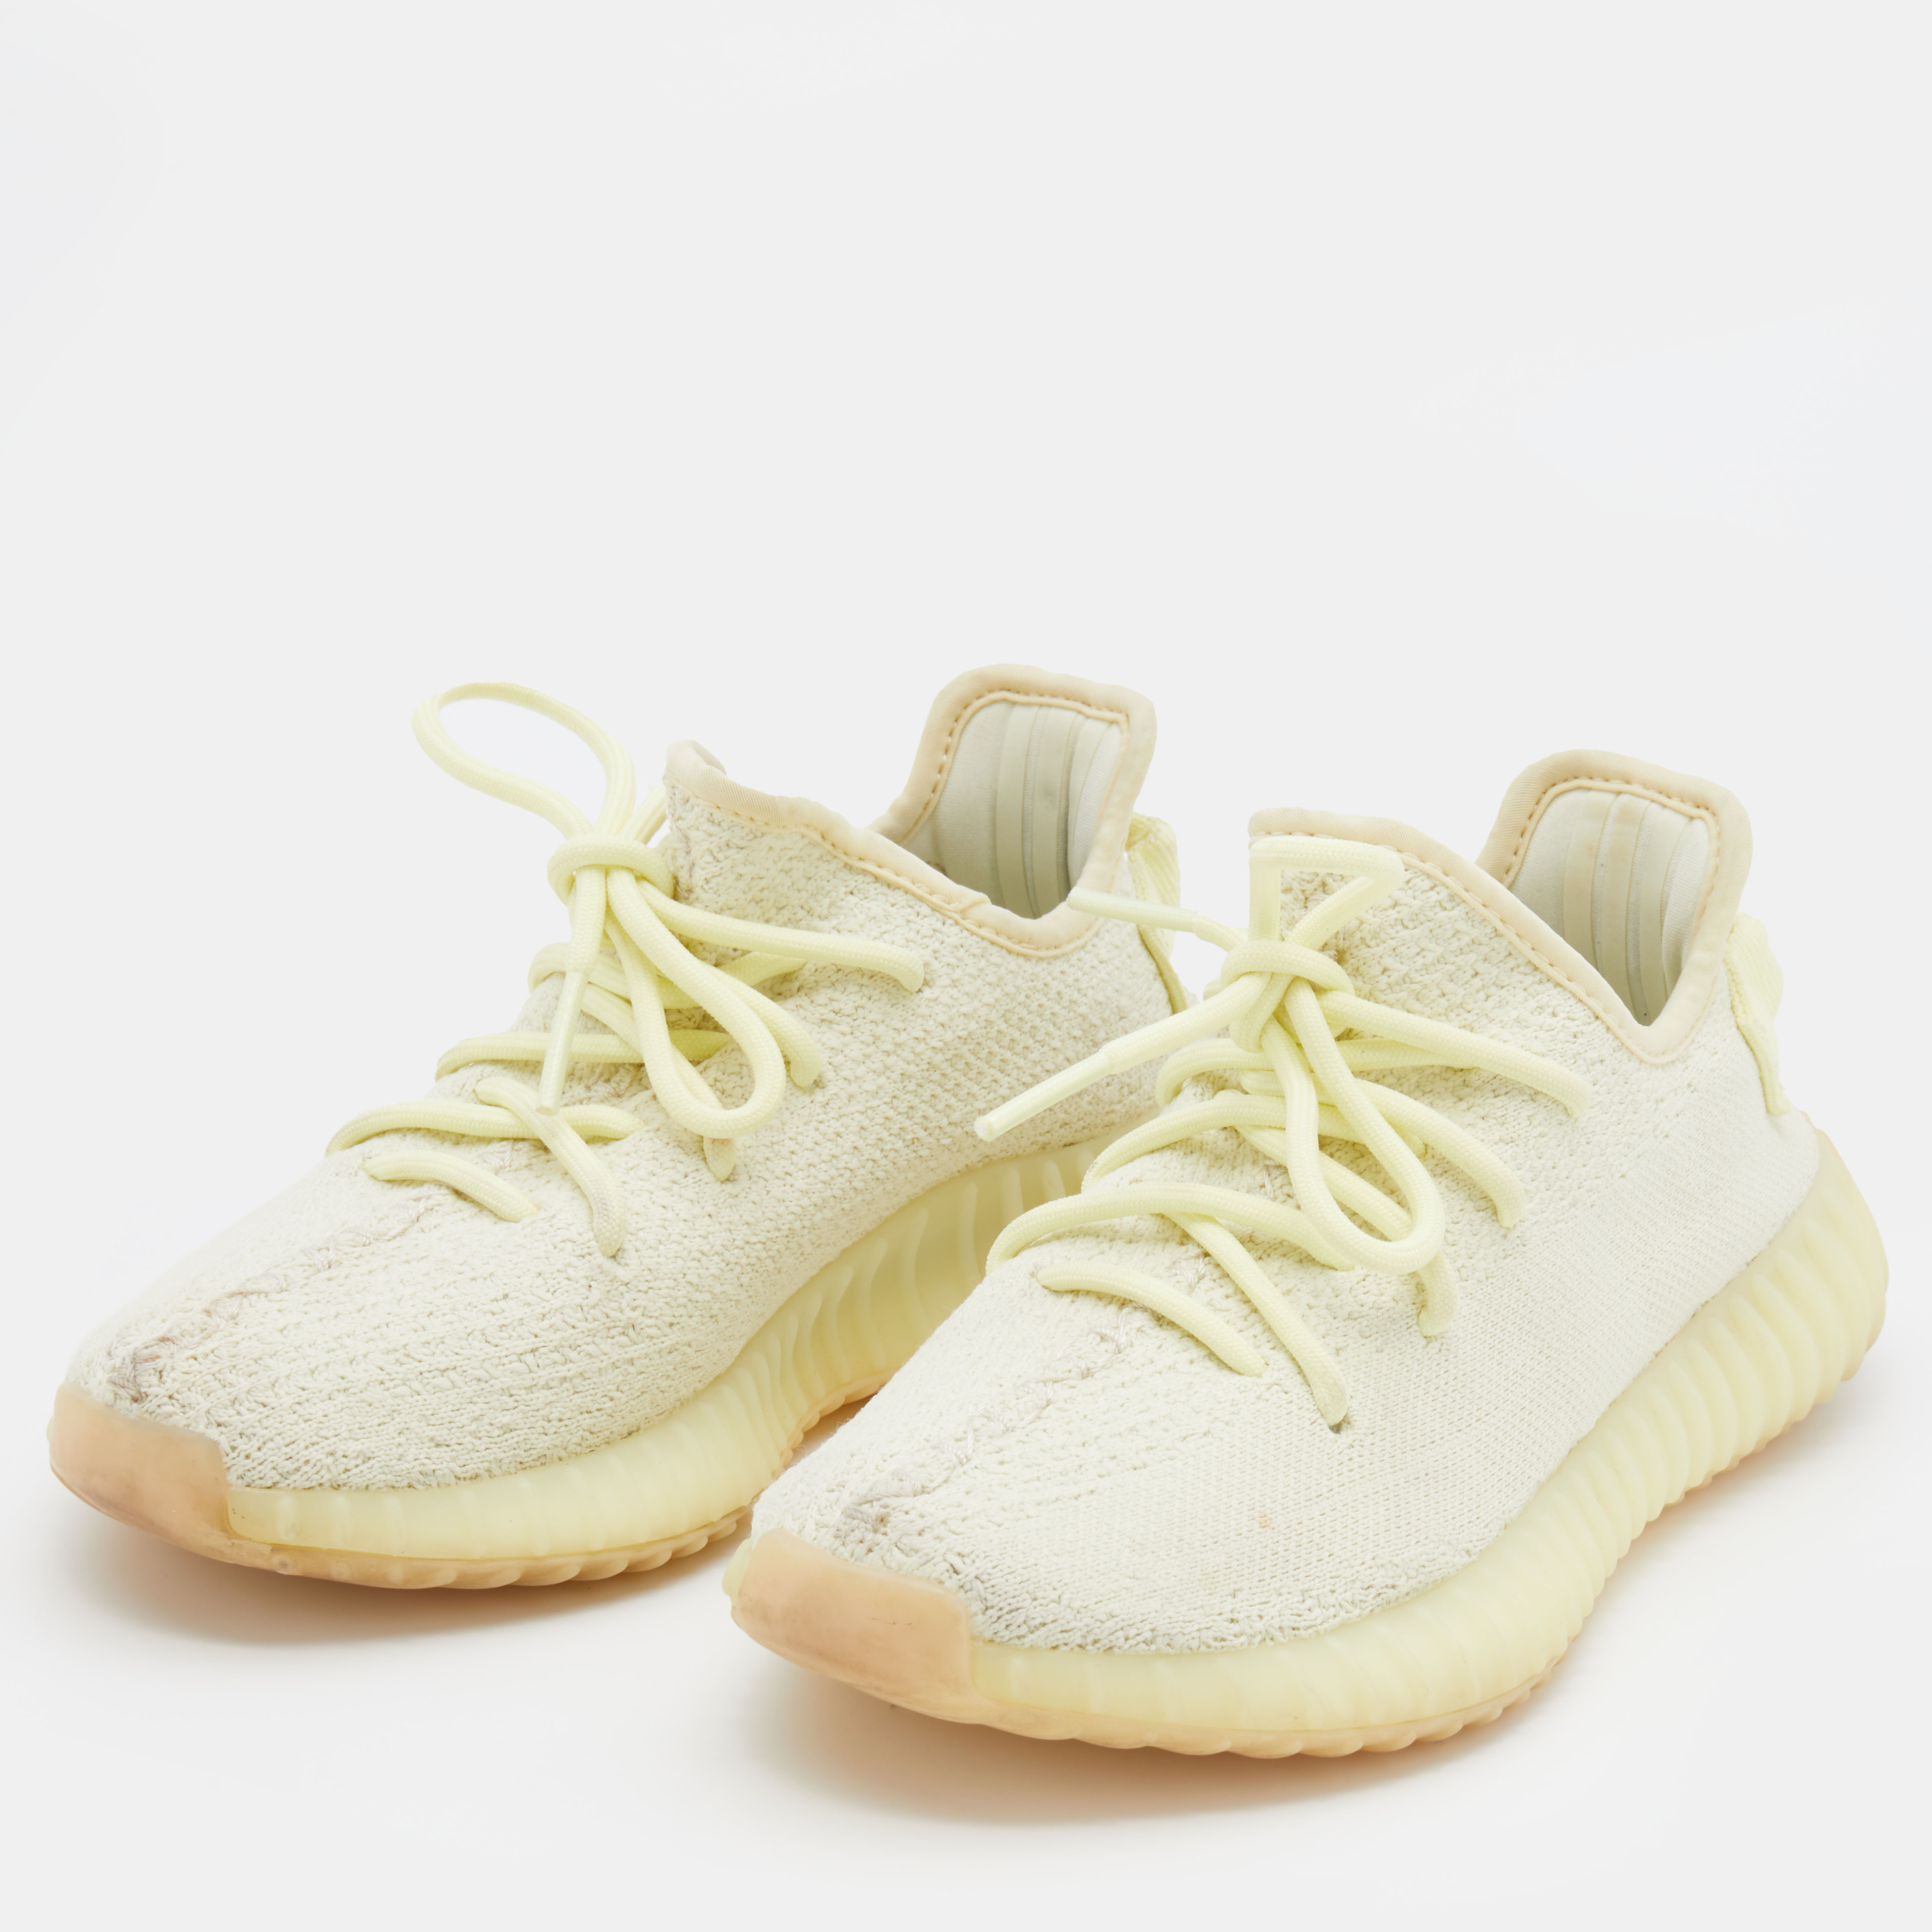 

Yeezy x Adidas Light Yellow Knit Fabric Boost 350 V2 Butter Low Top Sneakers Size